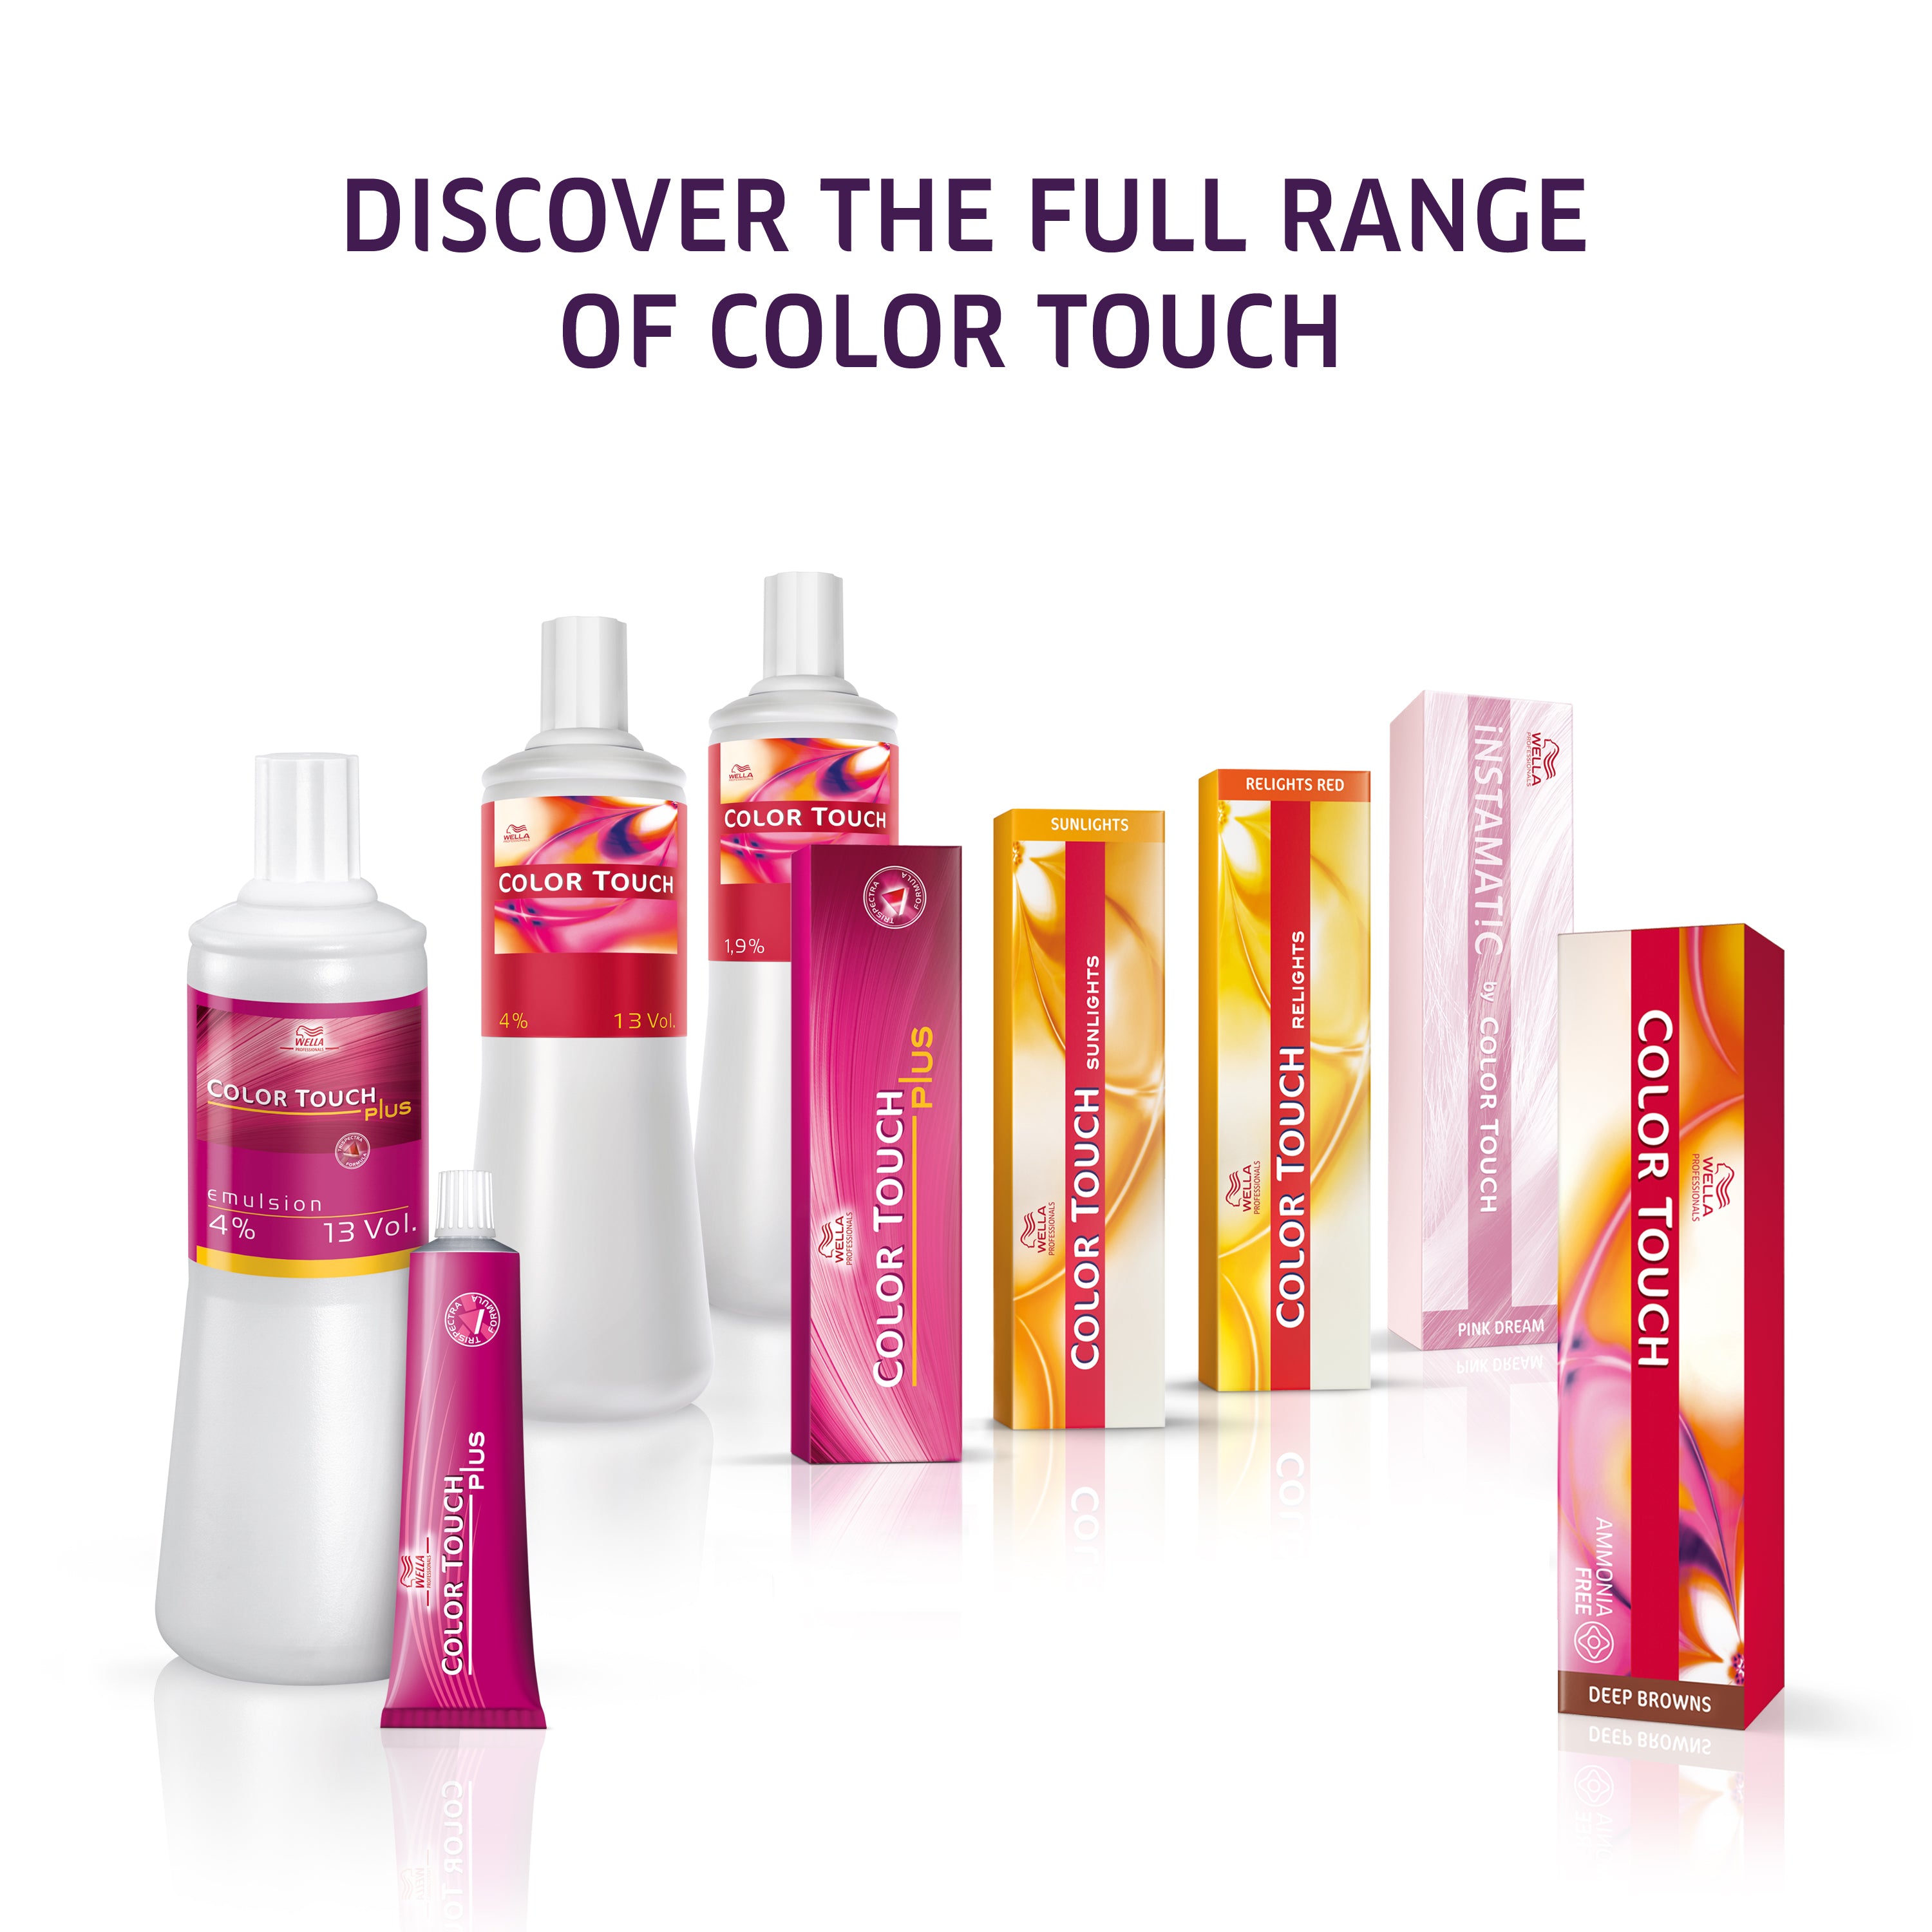 Wella Professional Color touch Plus 88/07 hellbl. int. Naturbr.